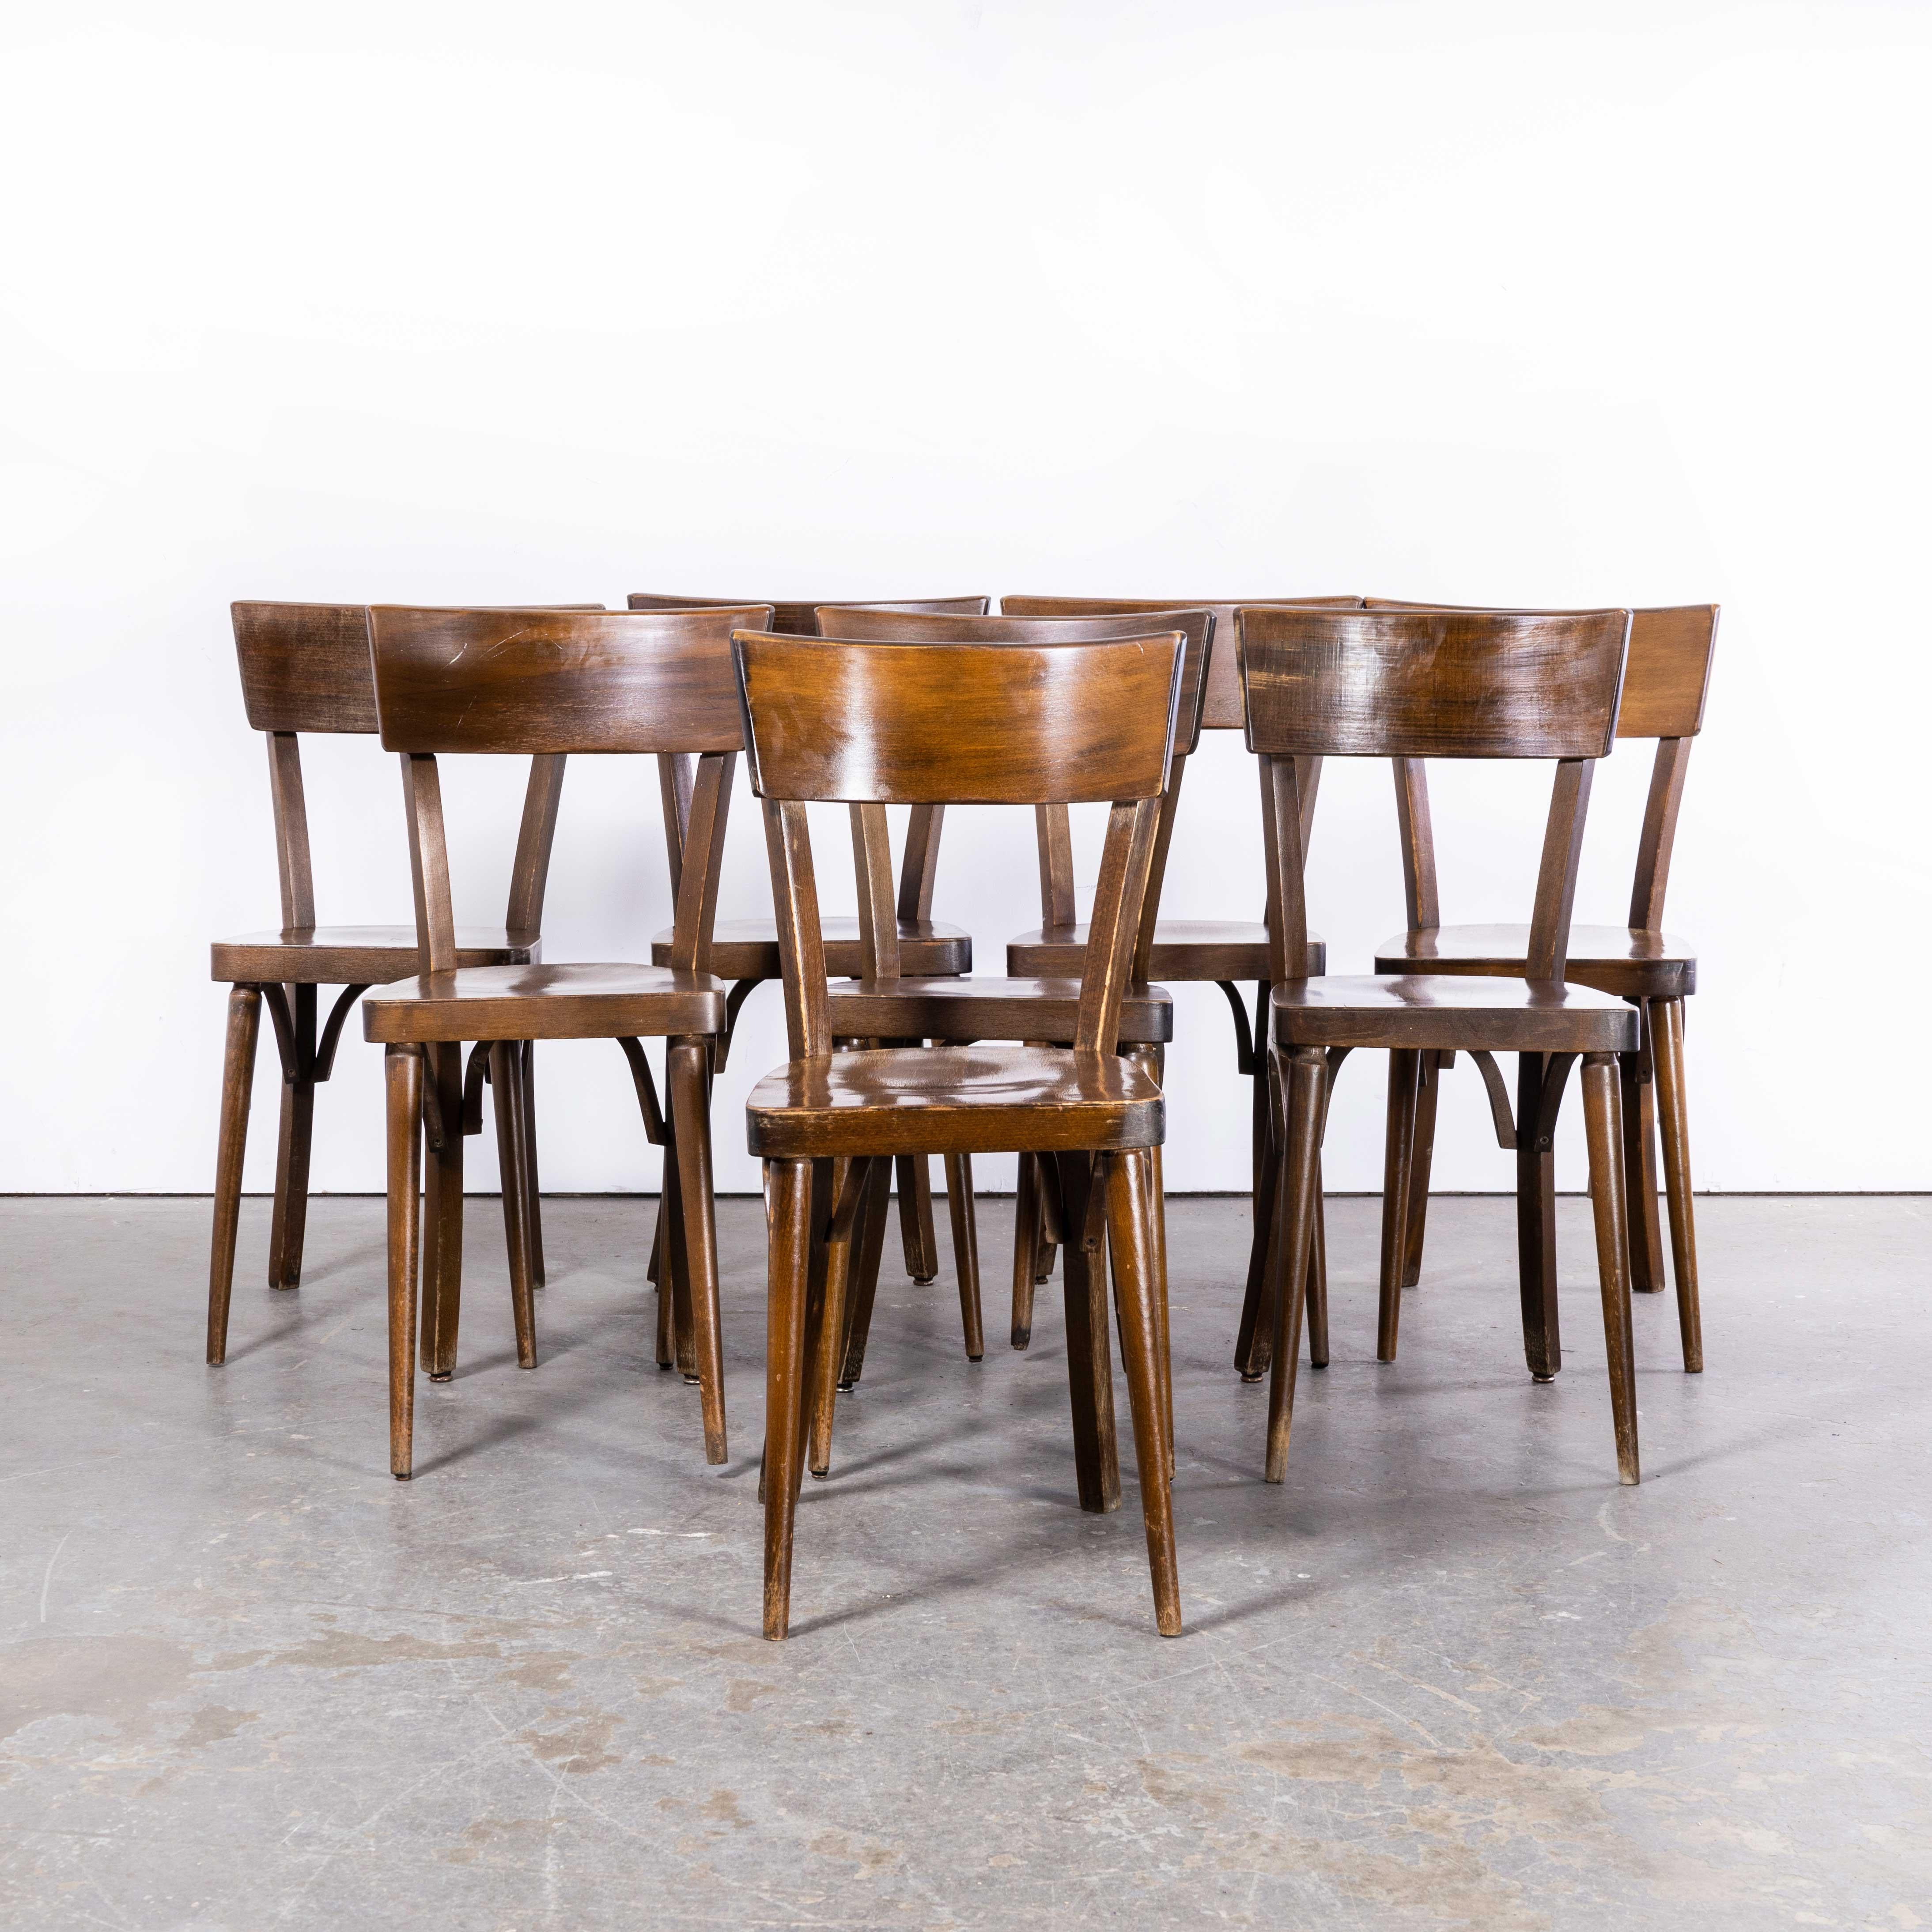 1960s Baumann Deep Back Walnut Bistro Dining Chairs – Set Of Eight
1960s Baumann Deep Back Walnut Bistro Dining Chairs – Set Of Eight. Classic bistro chairs made in France by the maker Baumann. Baumann chairs are relatively off the radar and are